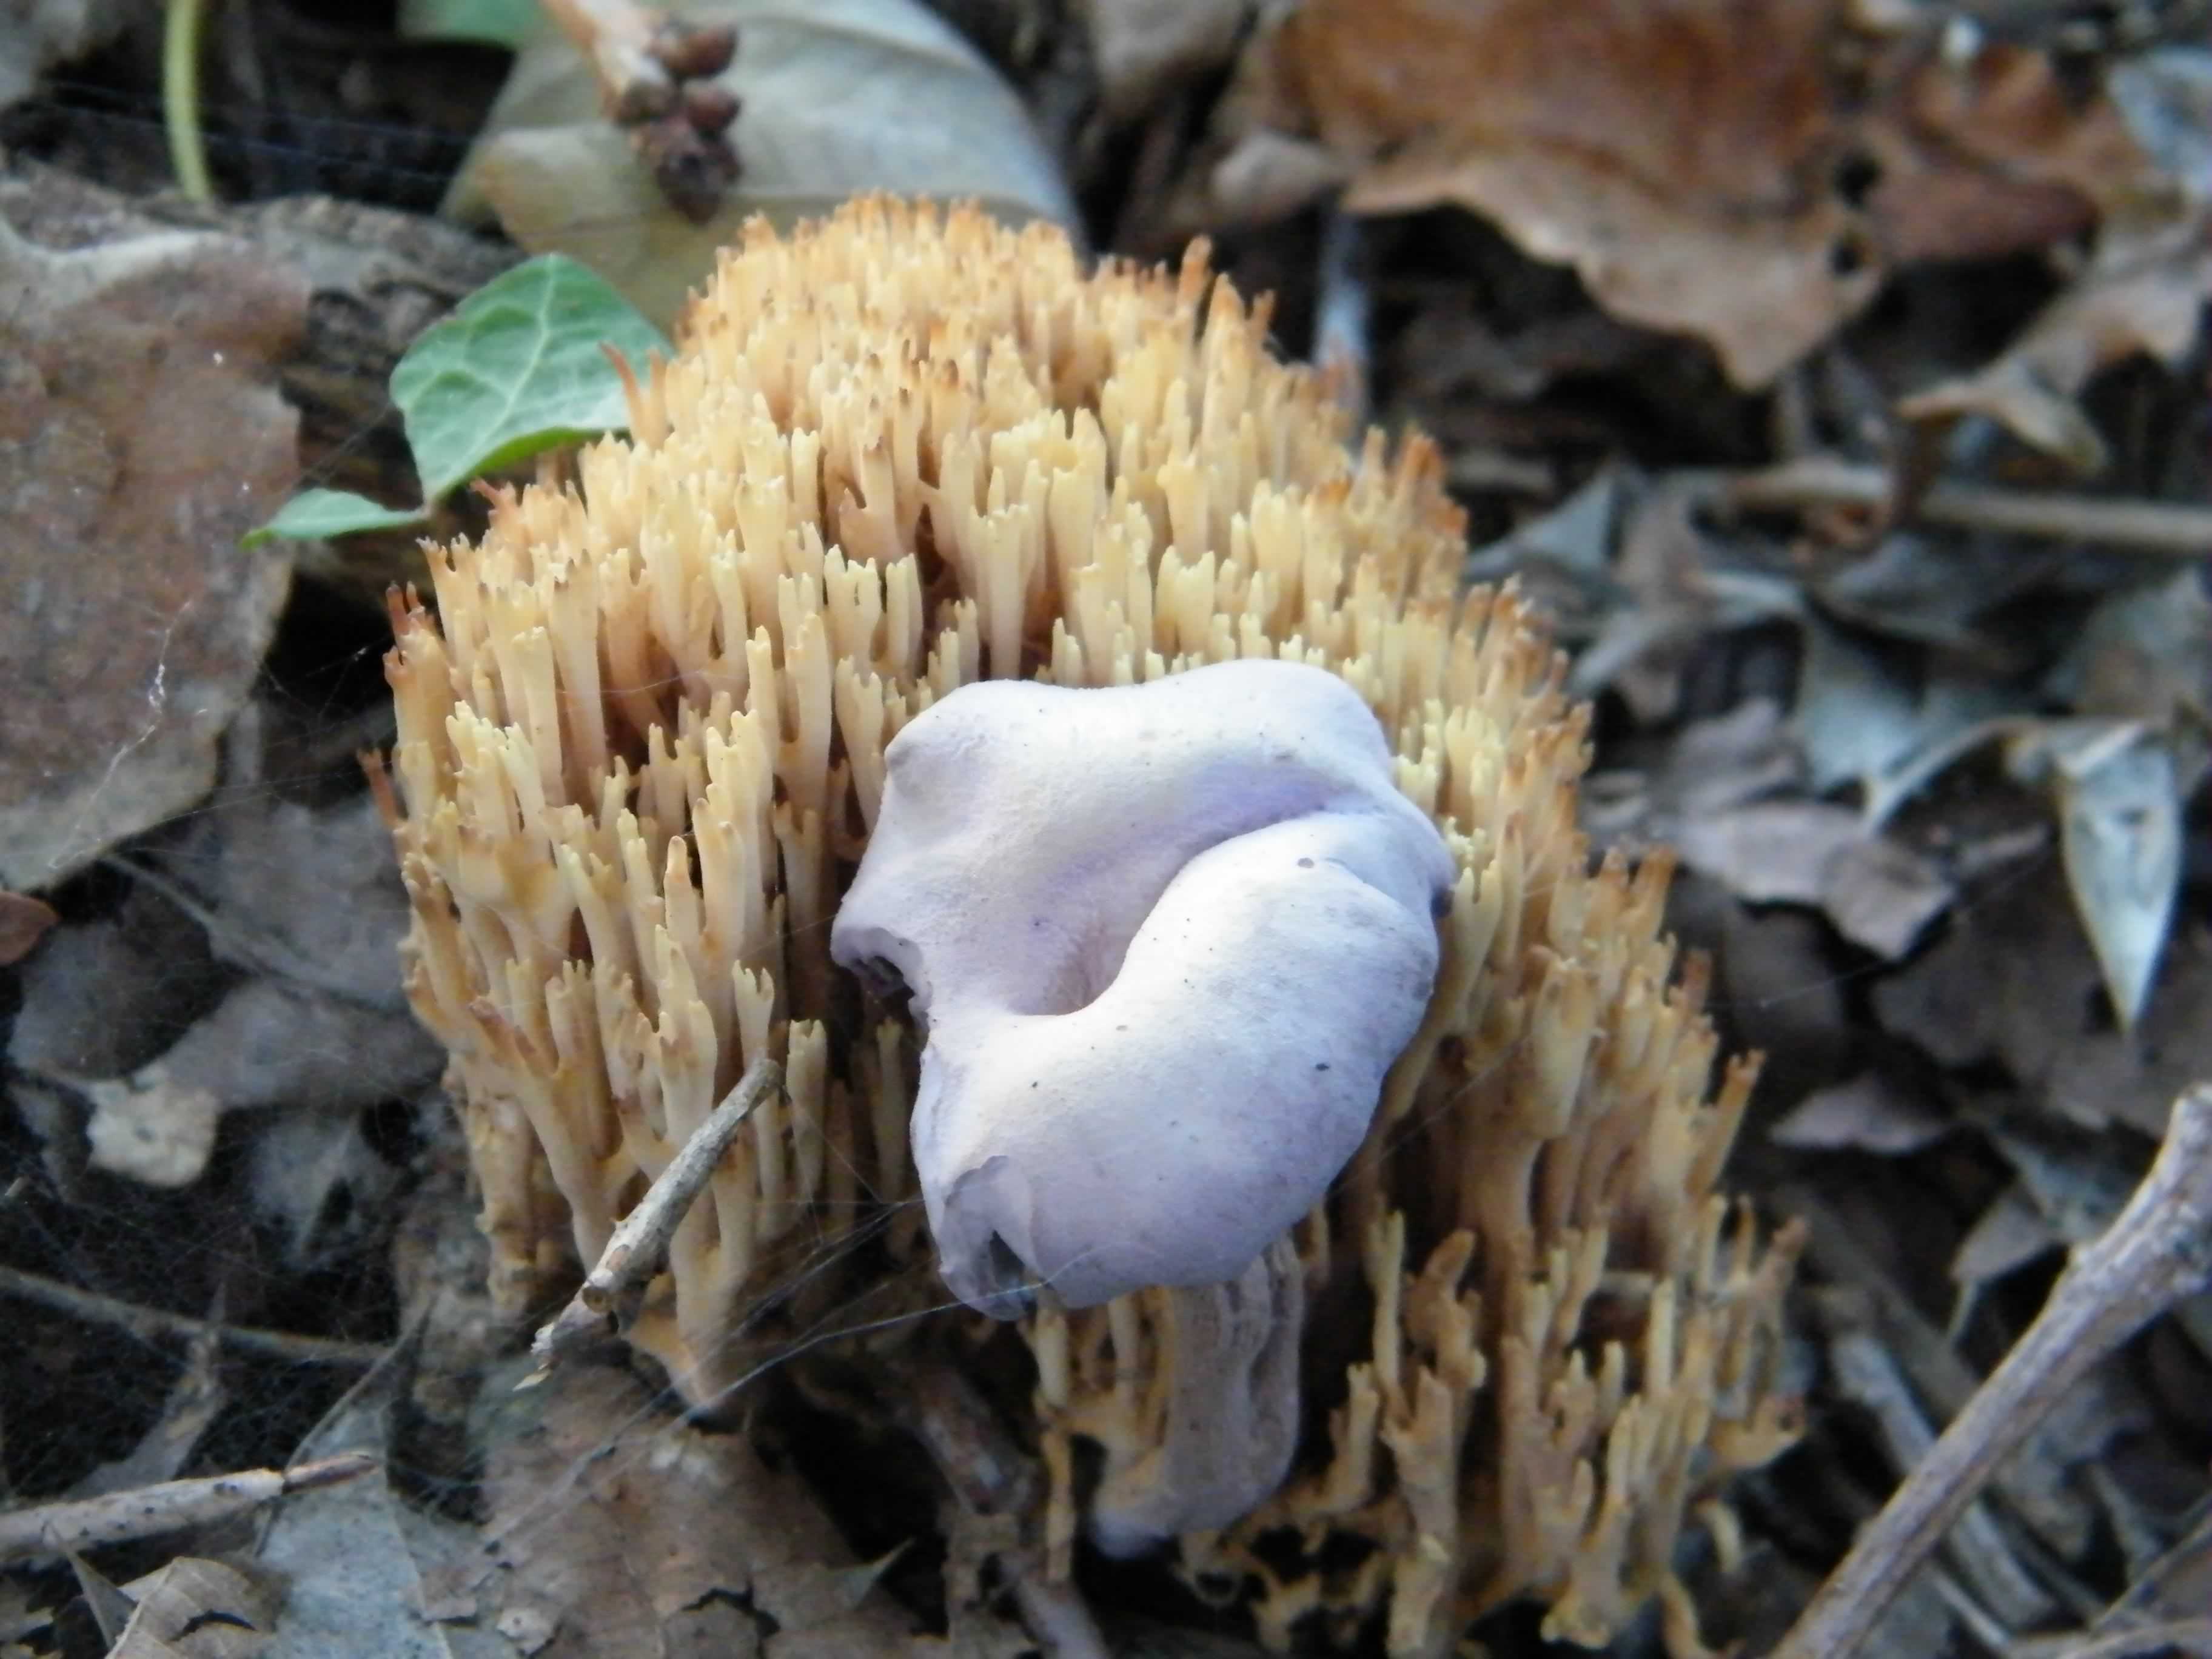 The Goblet - Pseudoclitocybe cyathiformis species information page